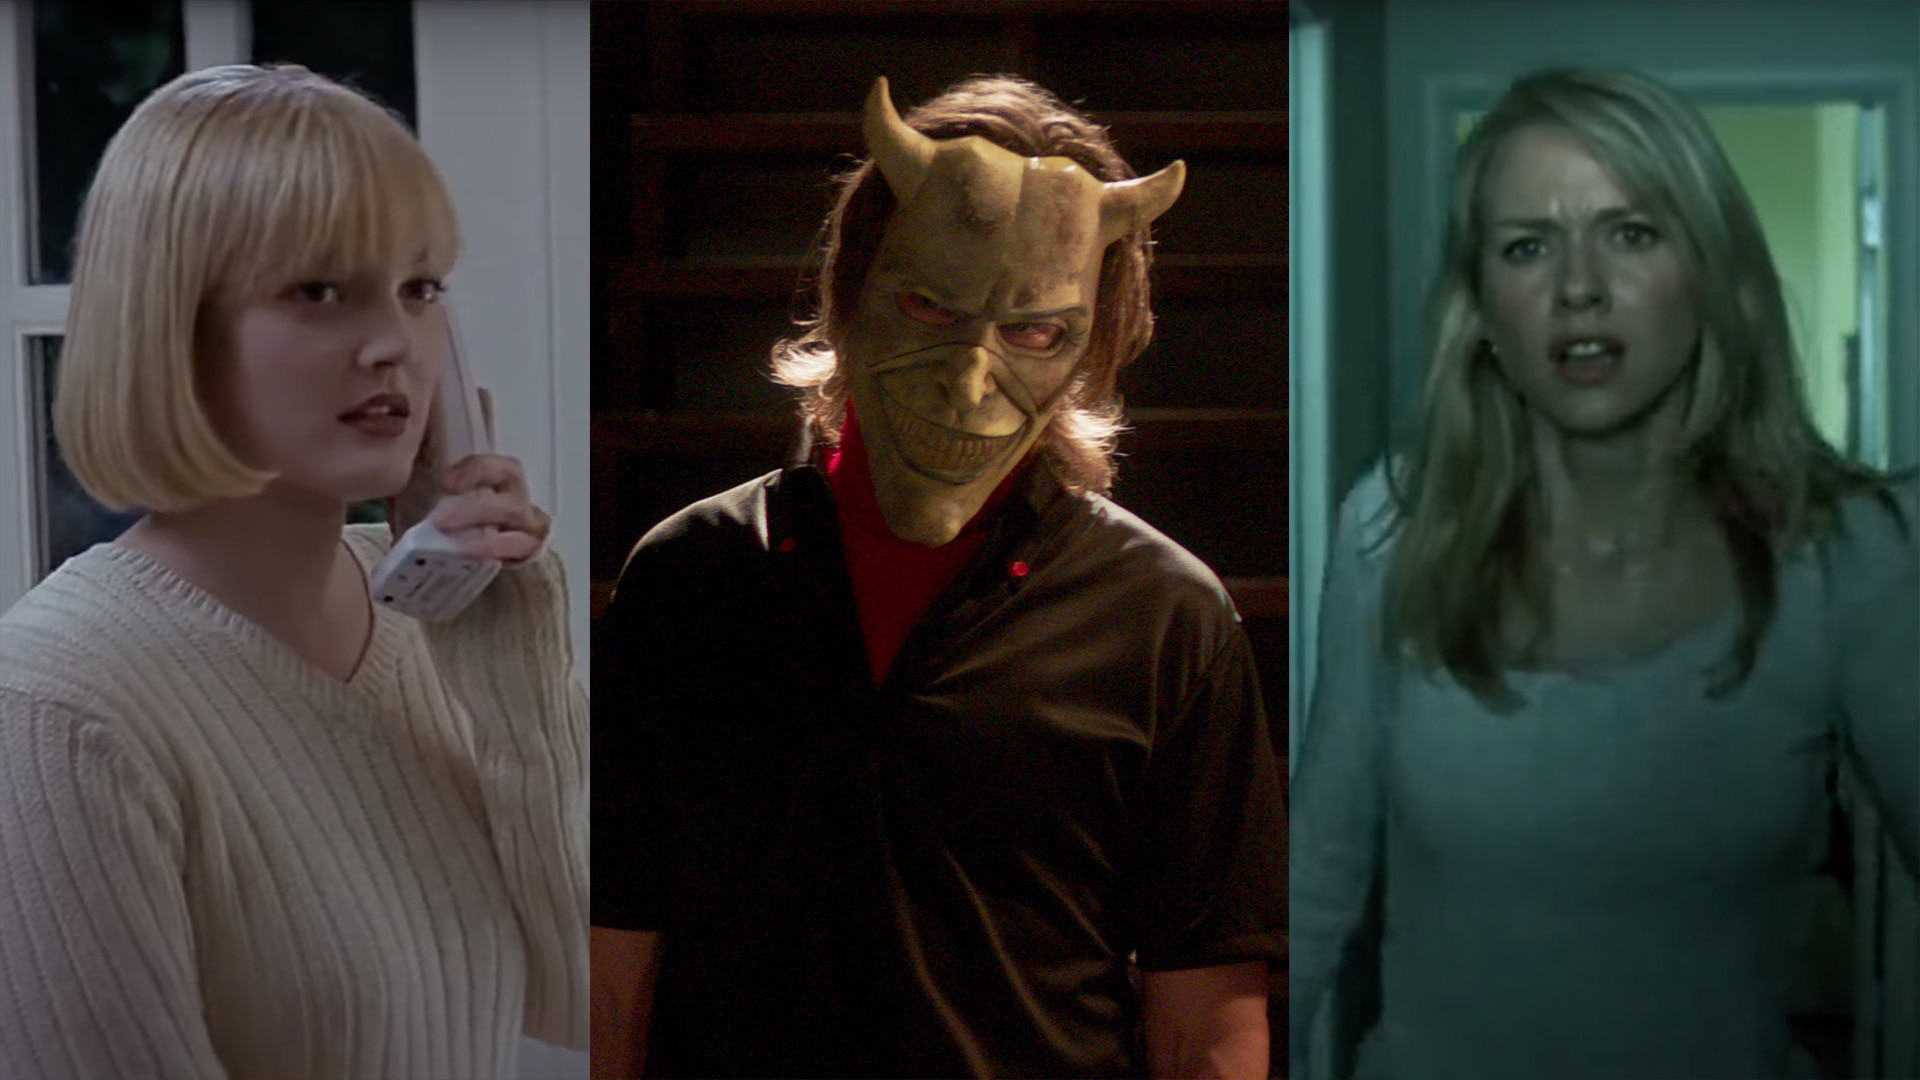 Drew Barrymore in Scream (1996), Ethan Hawke as The Grabber in The Black Phone (2022), and Naomi Watts in The Ring (2002